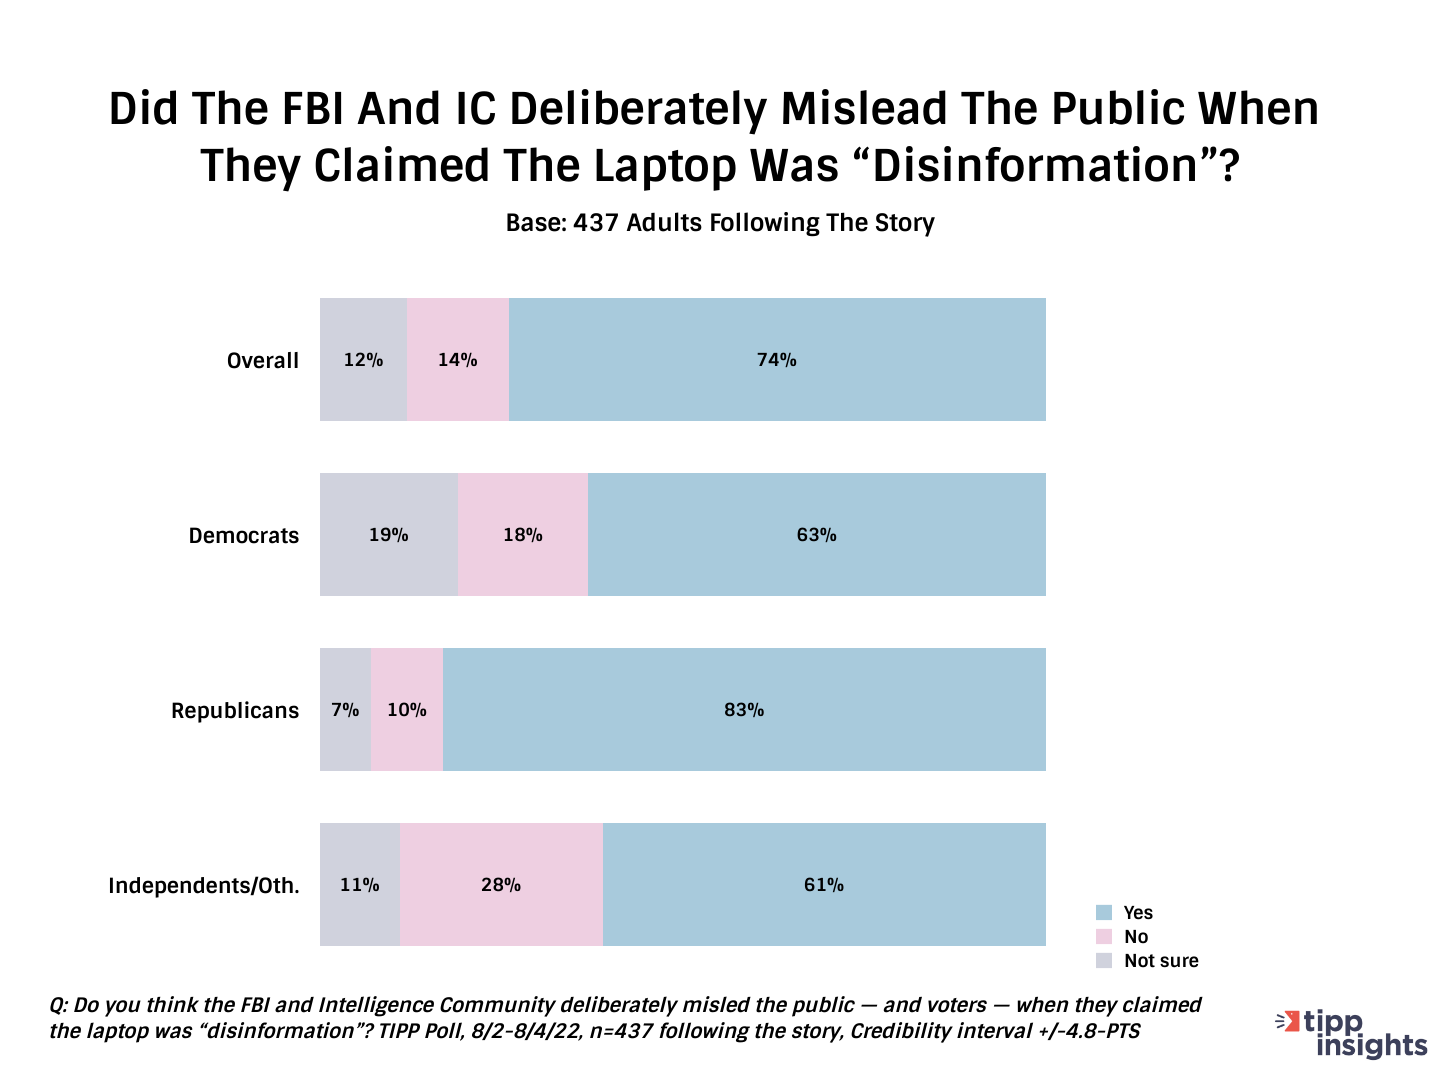 TIPP Poll results: Did the FBI and IC deliberately mislead the public stating the Hunter Biden laptop was disinformation